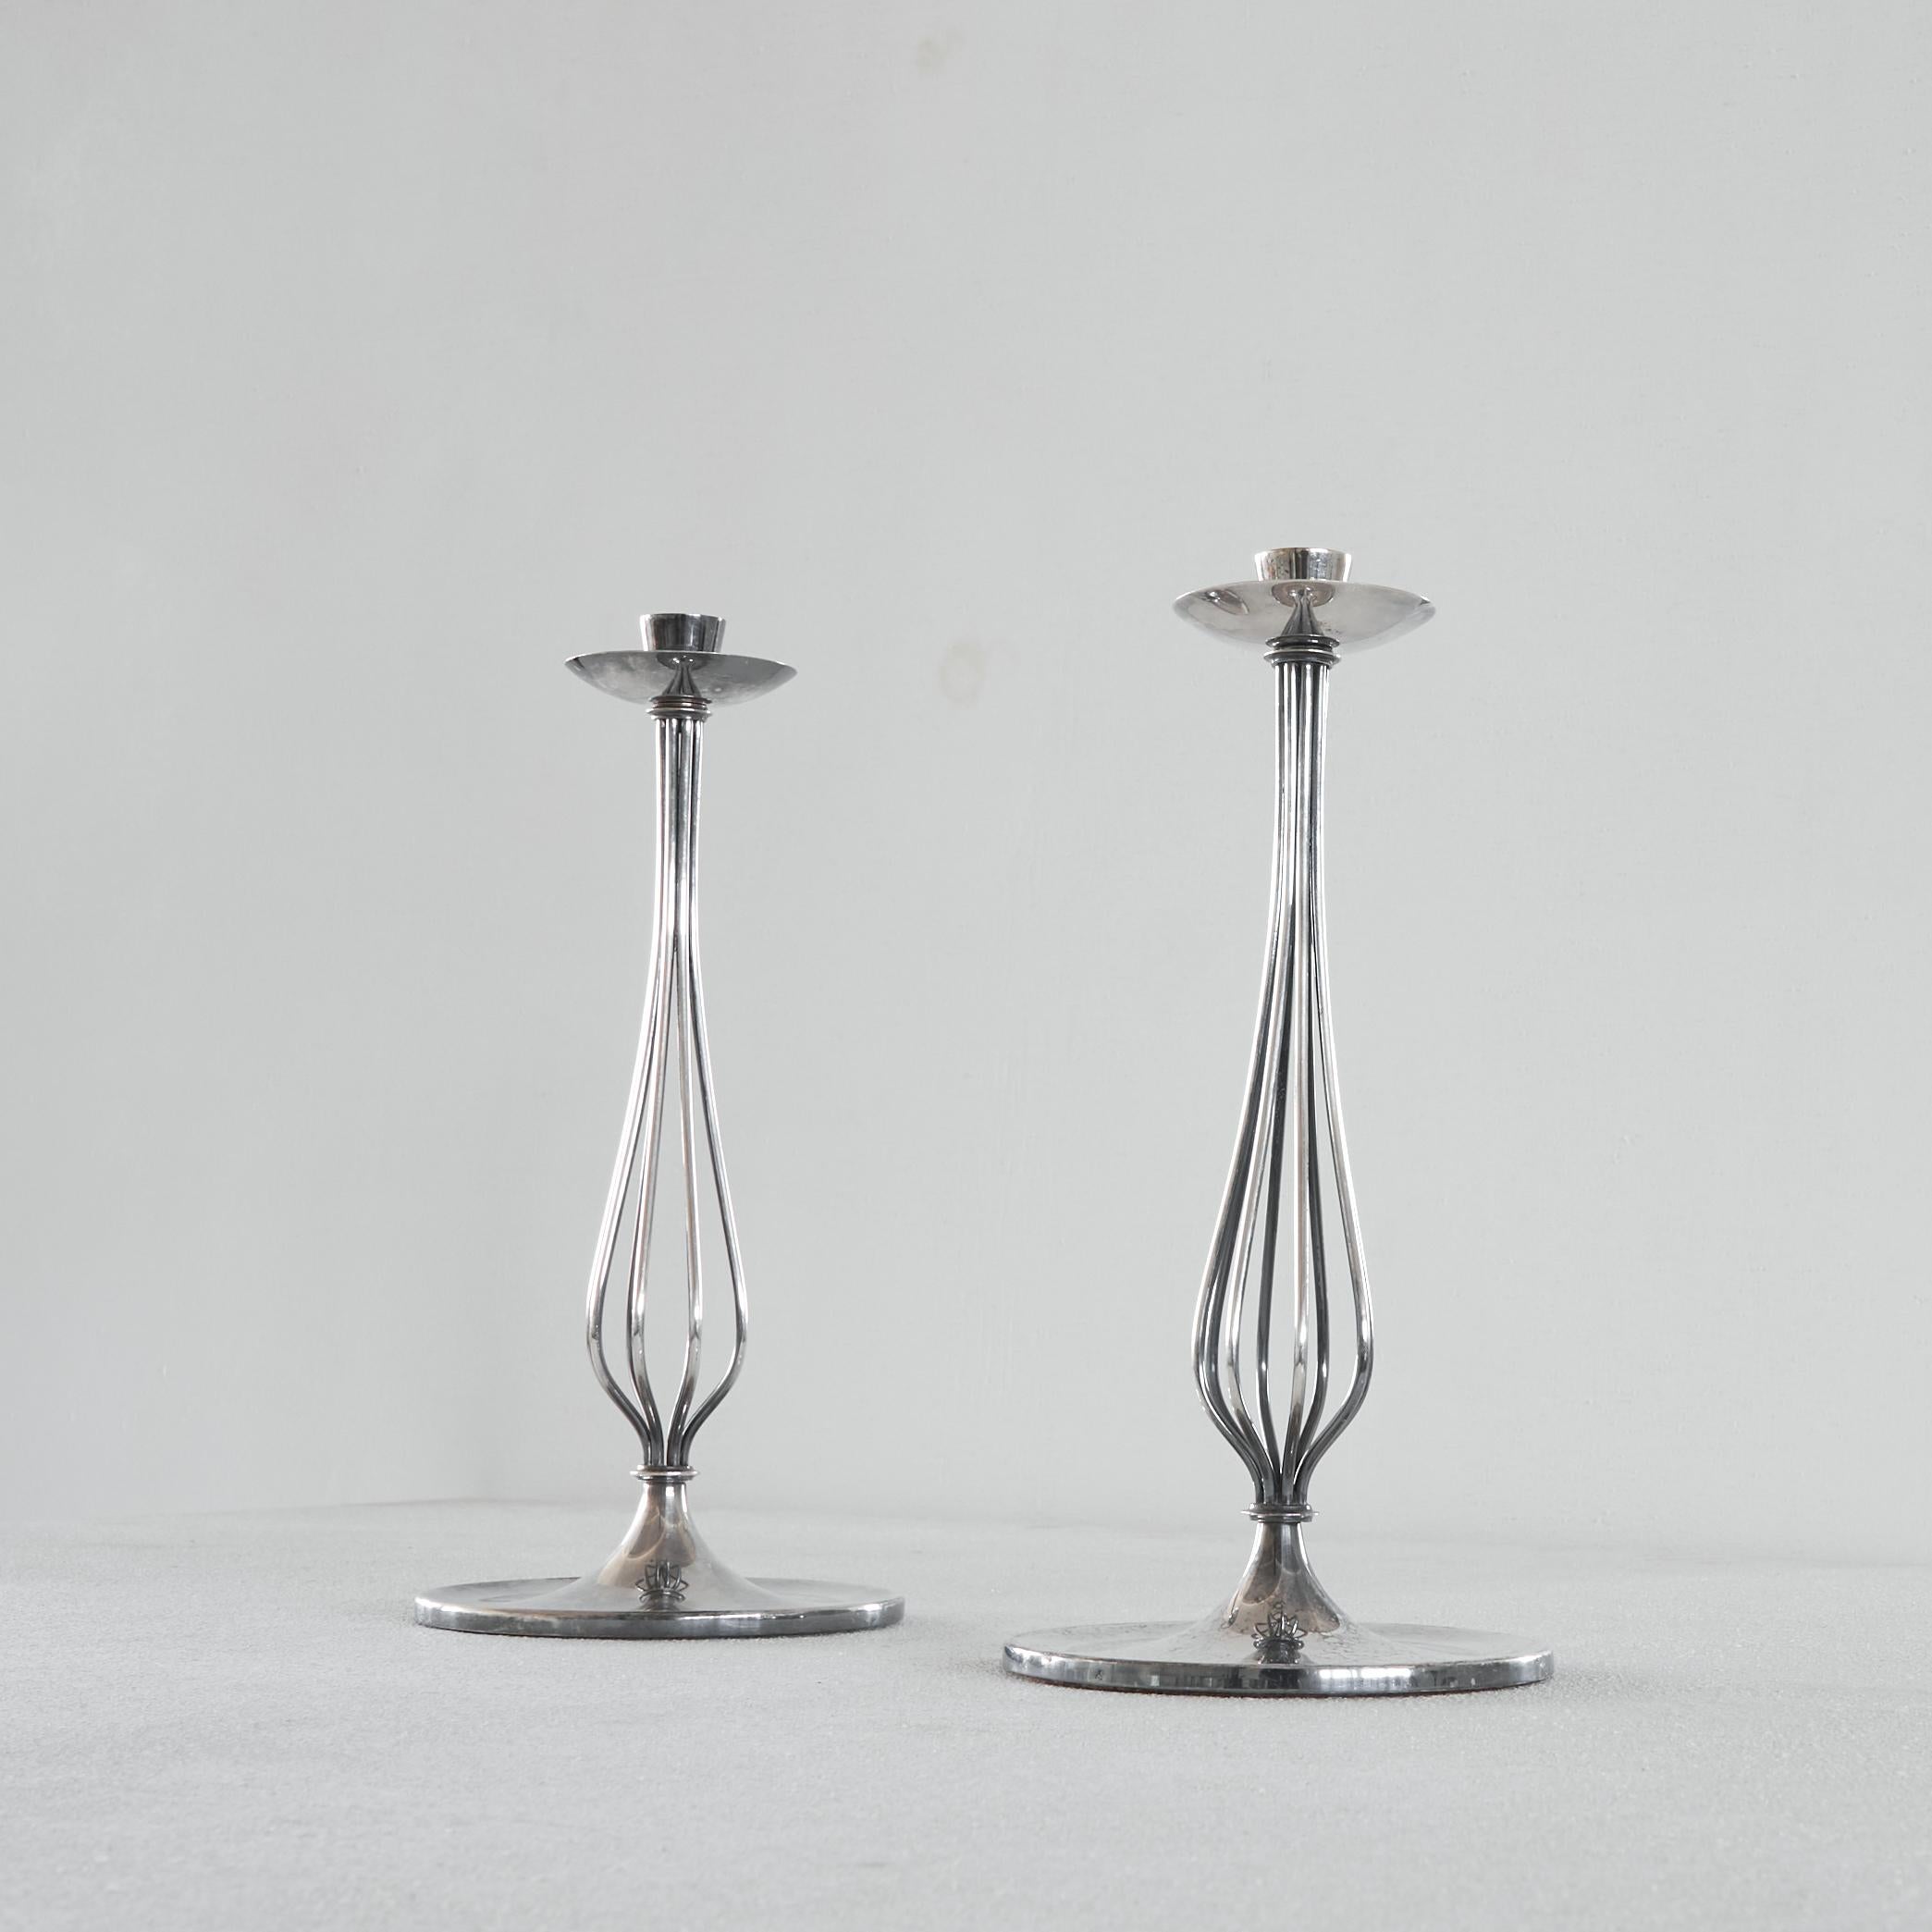 Hand-Crafted Gustav Beran Pair of Silver Plated Candle Holders Van Kempen & Begeer 1960s For Sale